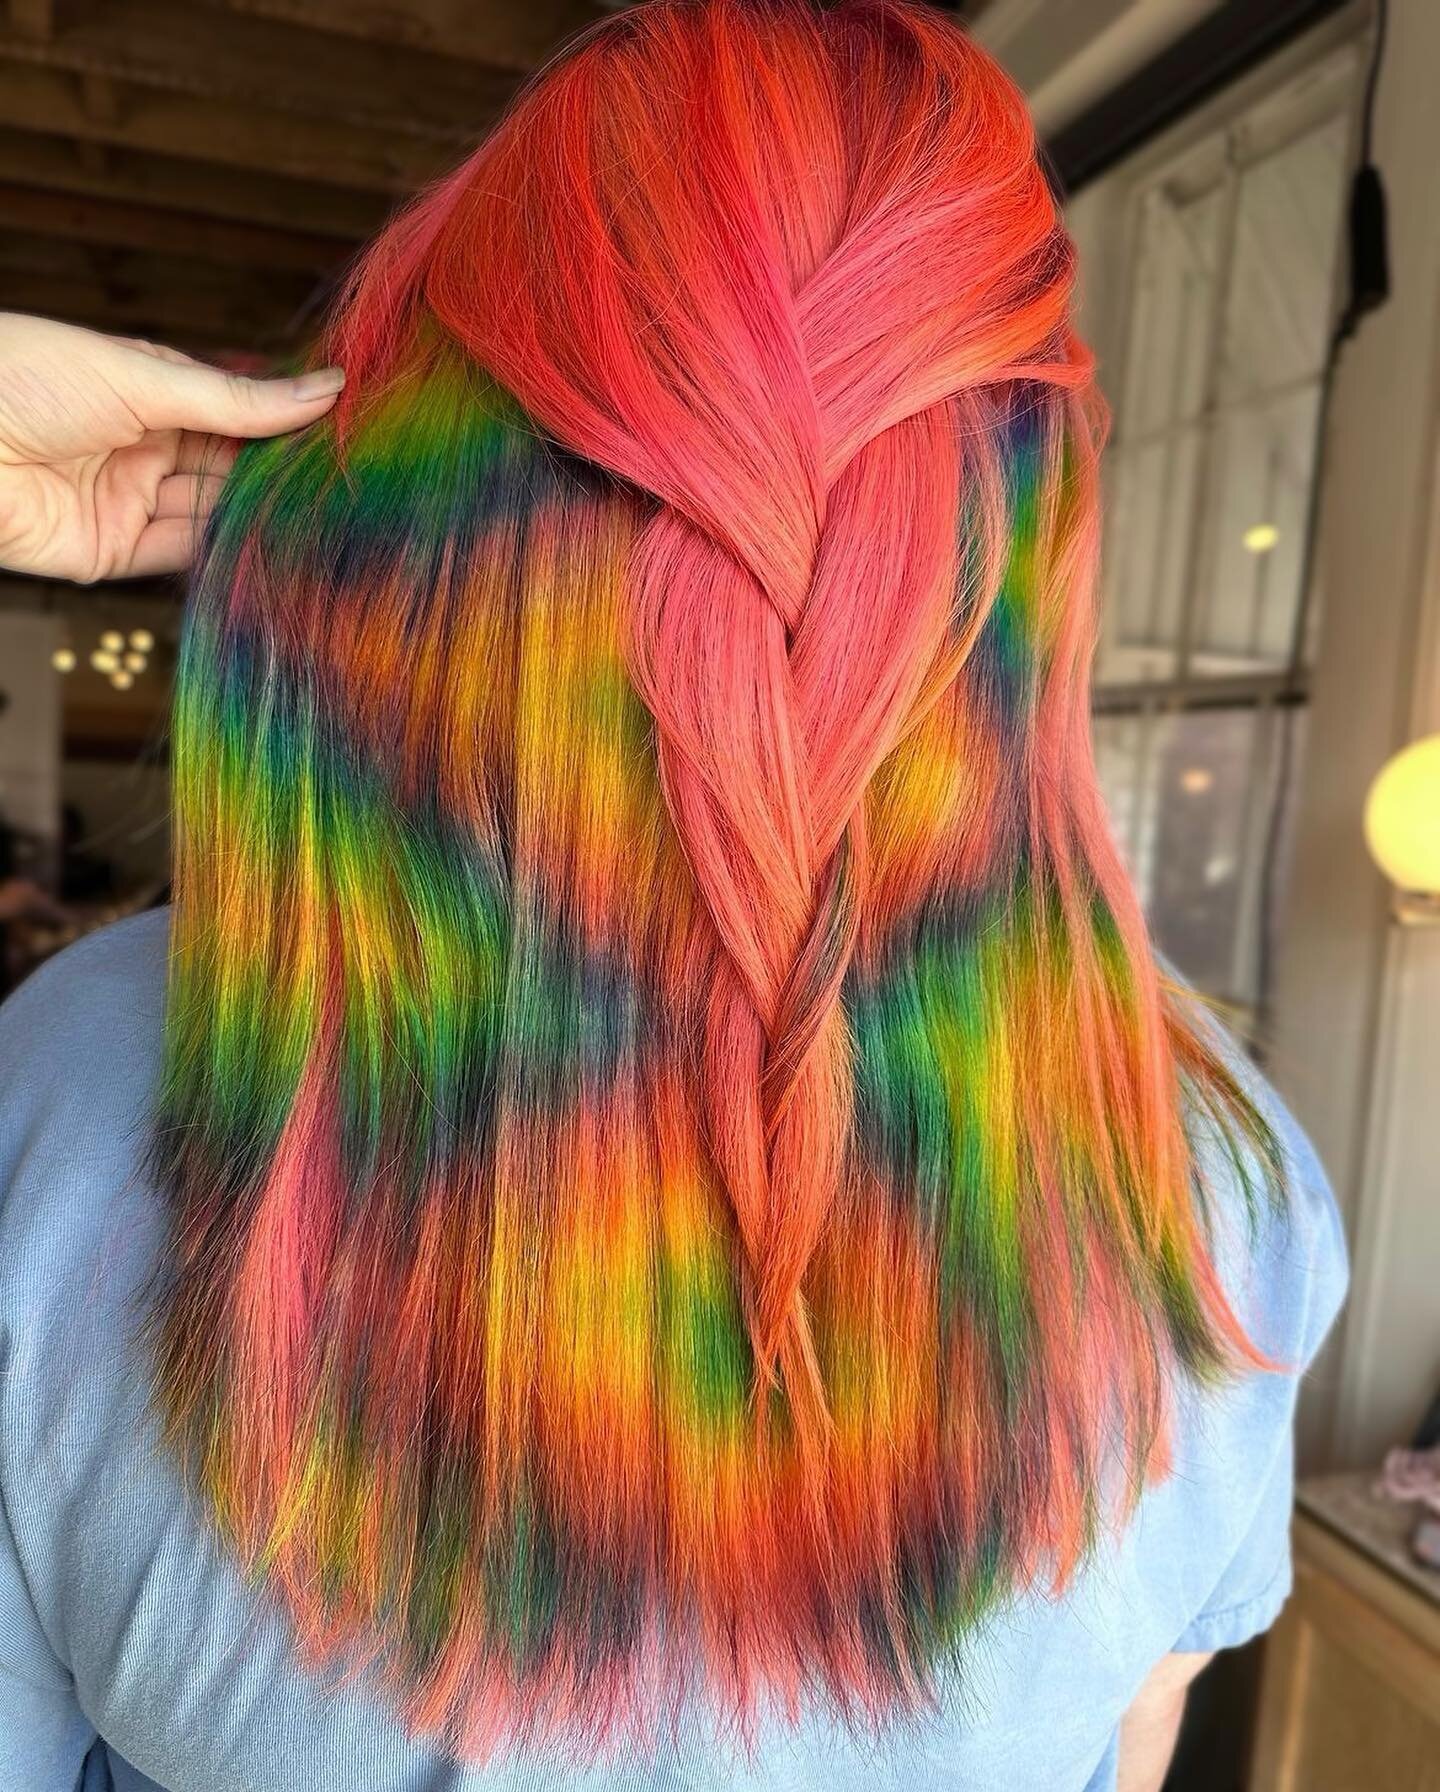 Psychedelic ⚡️|| @hair.artist.trex at the Brandon Co Op